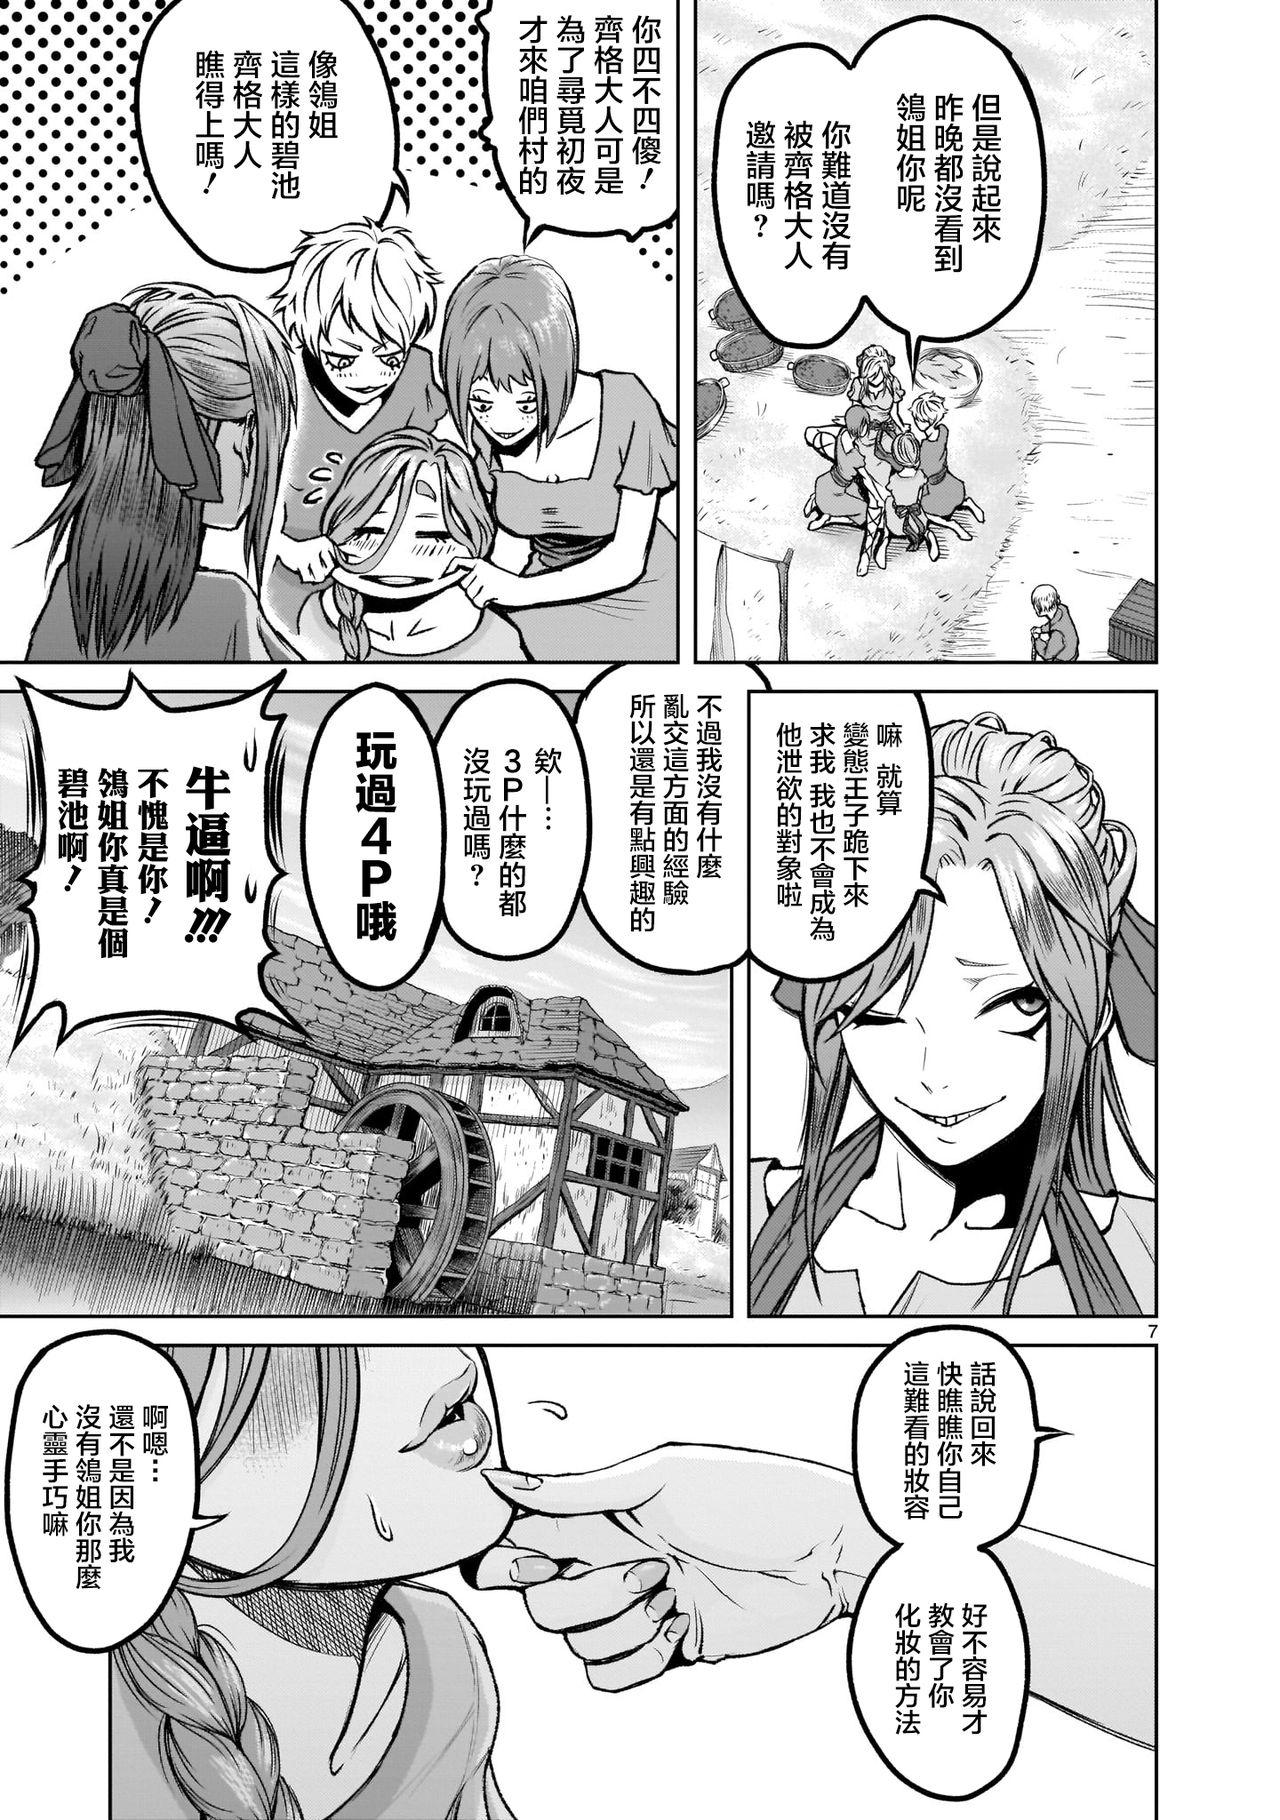 Pigtails 蔷薇园传奇 01-08 Chinese Vadia - Page 8